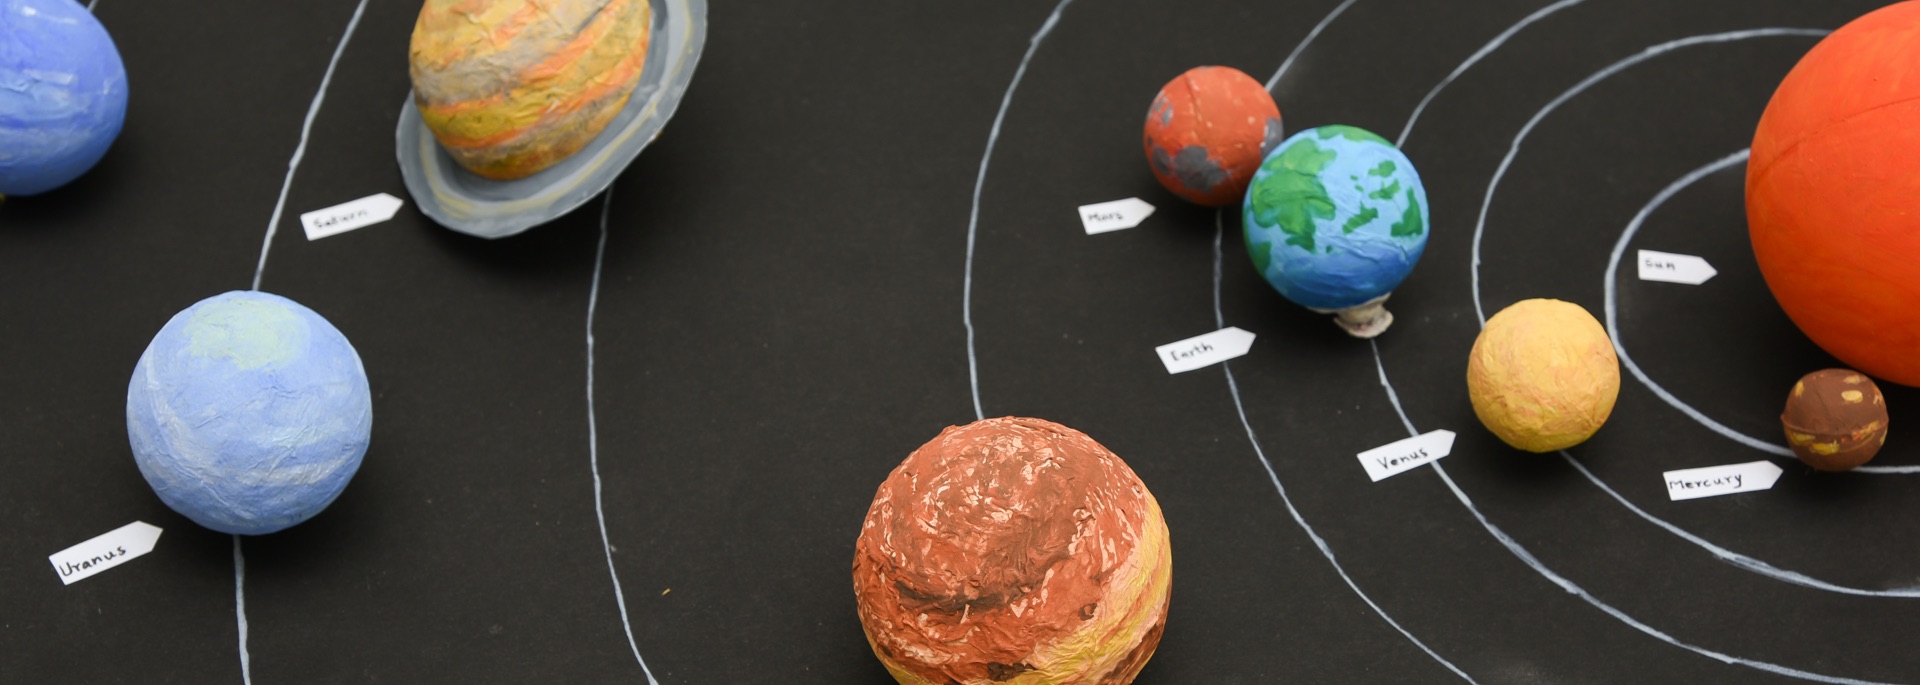 Solar System Demonstration, hopefully without any impacts!